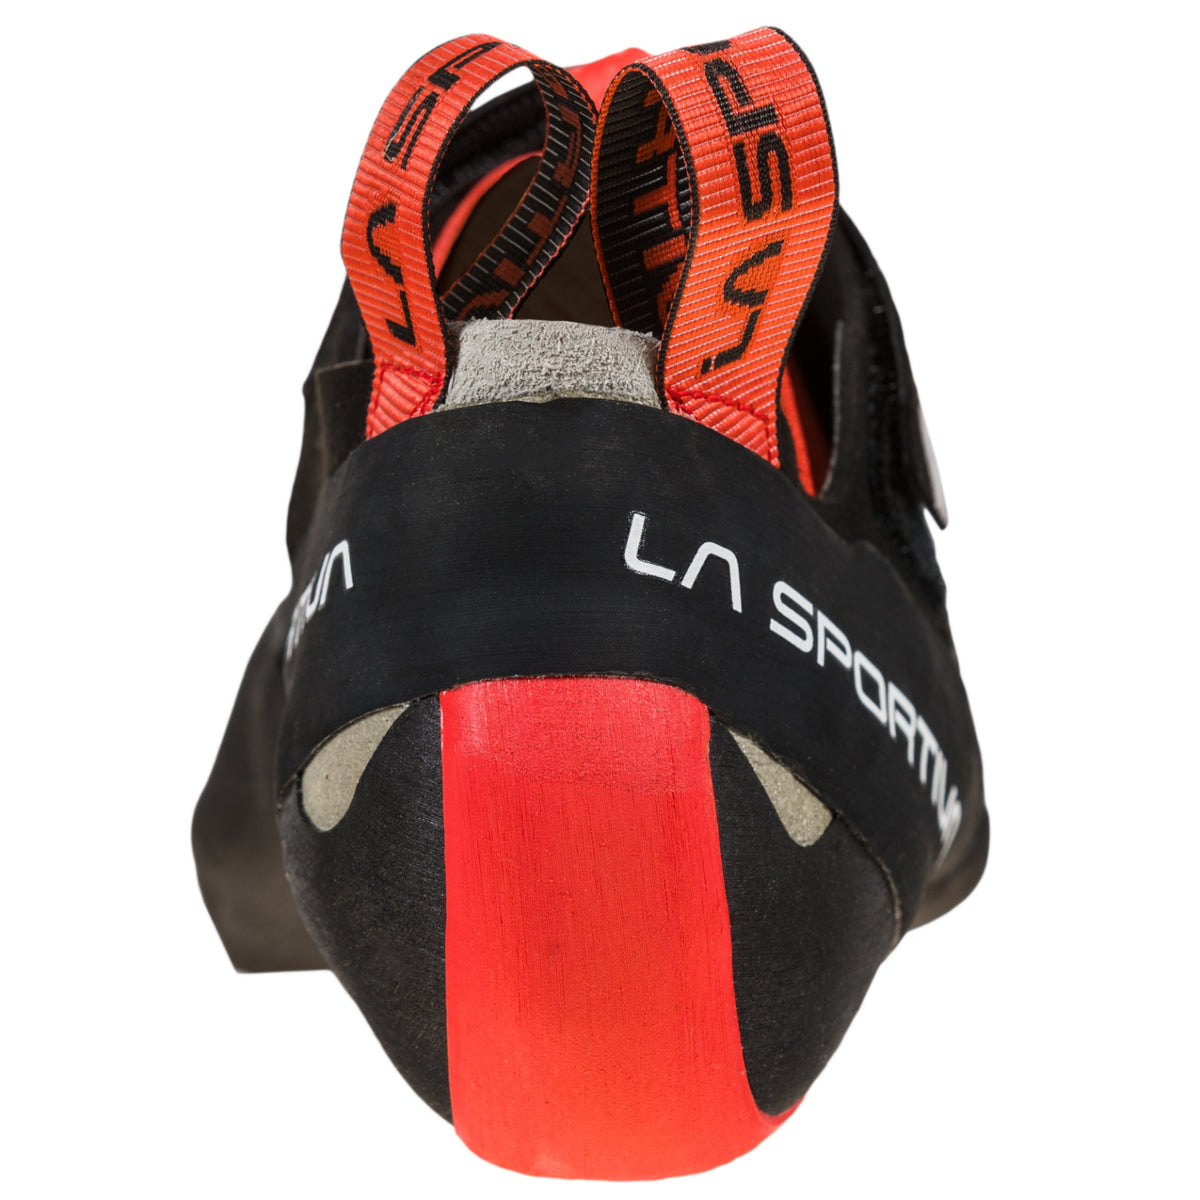 La Sportiva Theory Womens in black and red showing heel